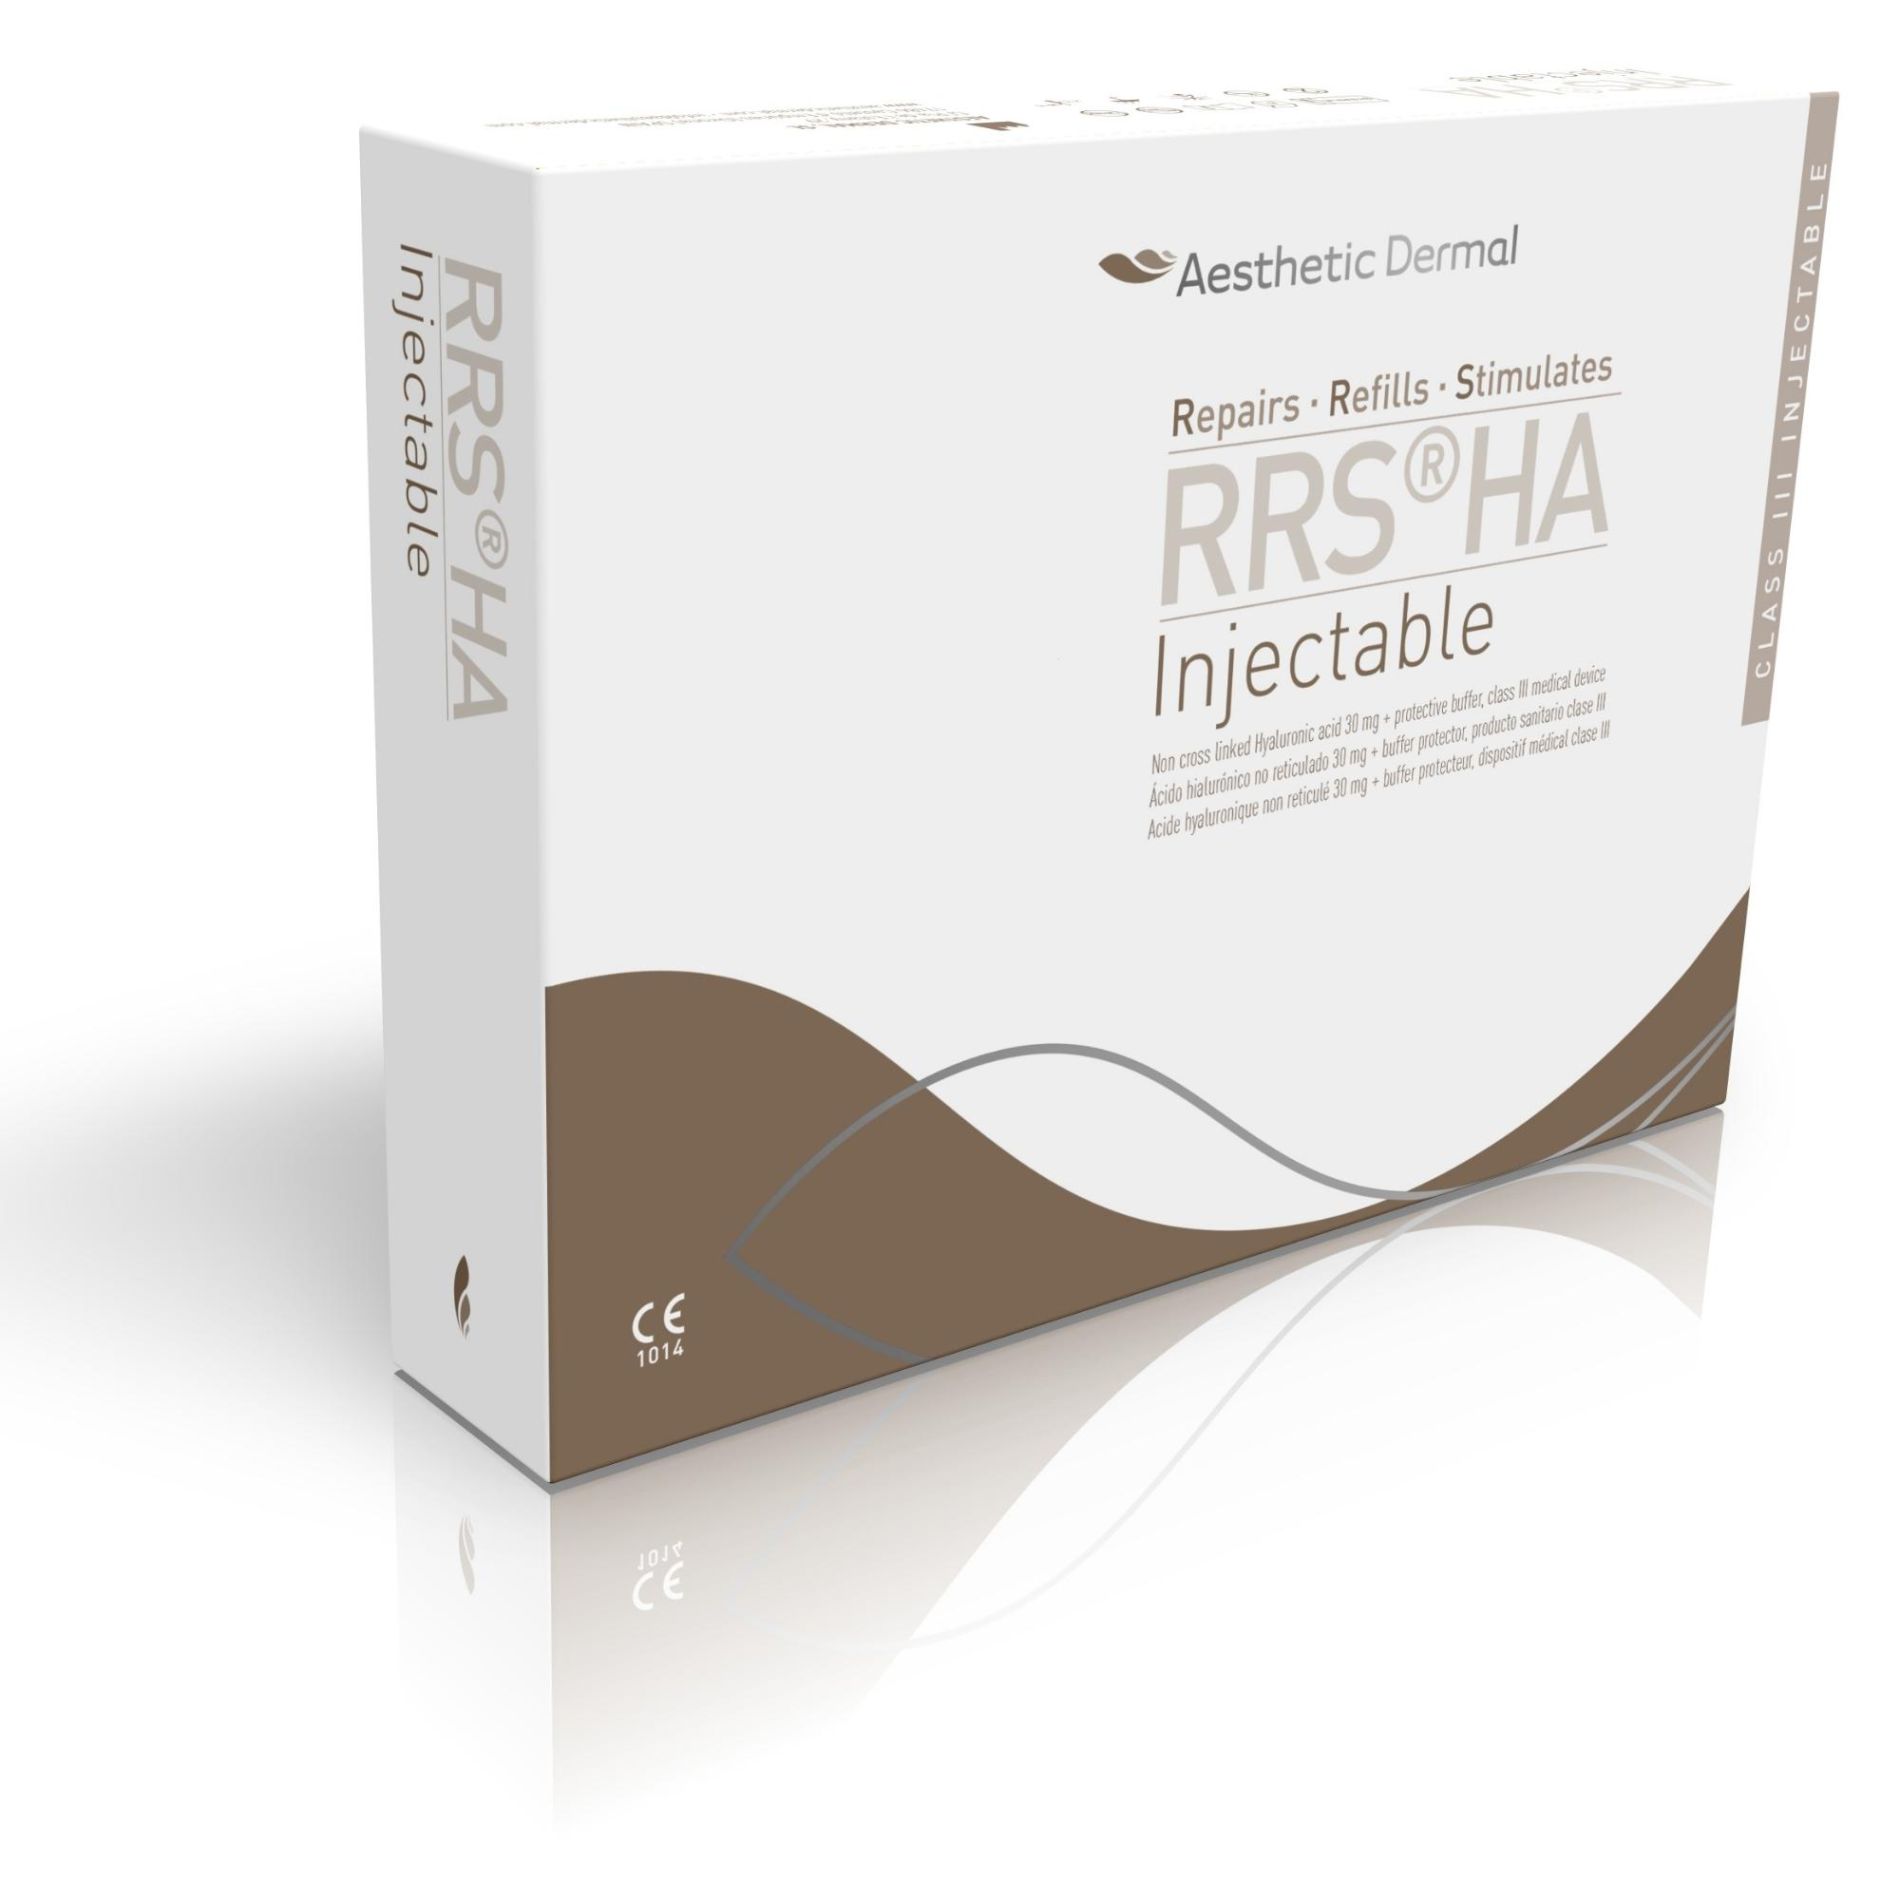 RRS® HA INJECTABLE